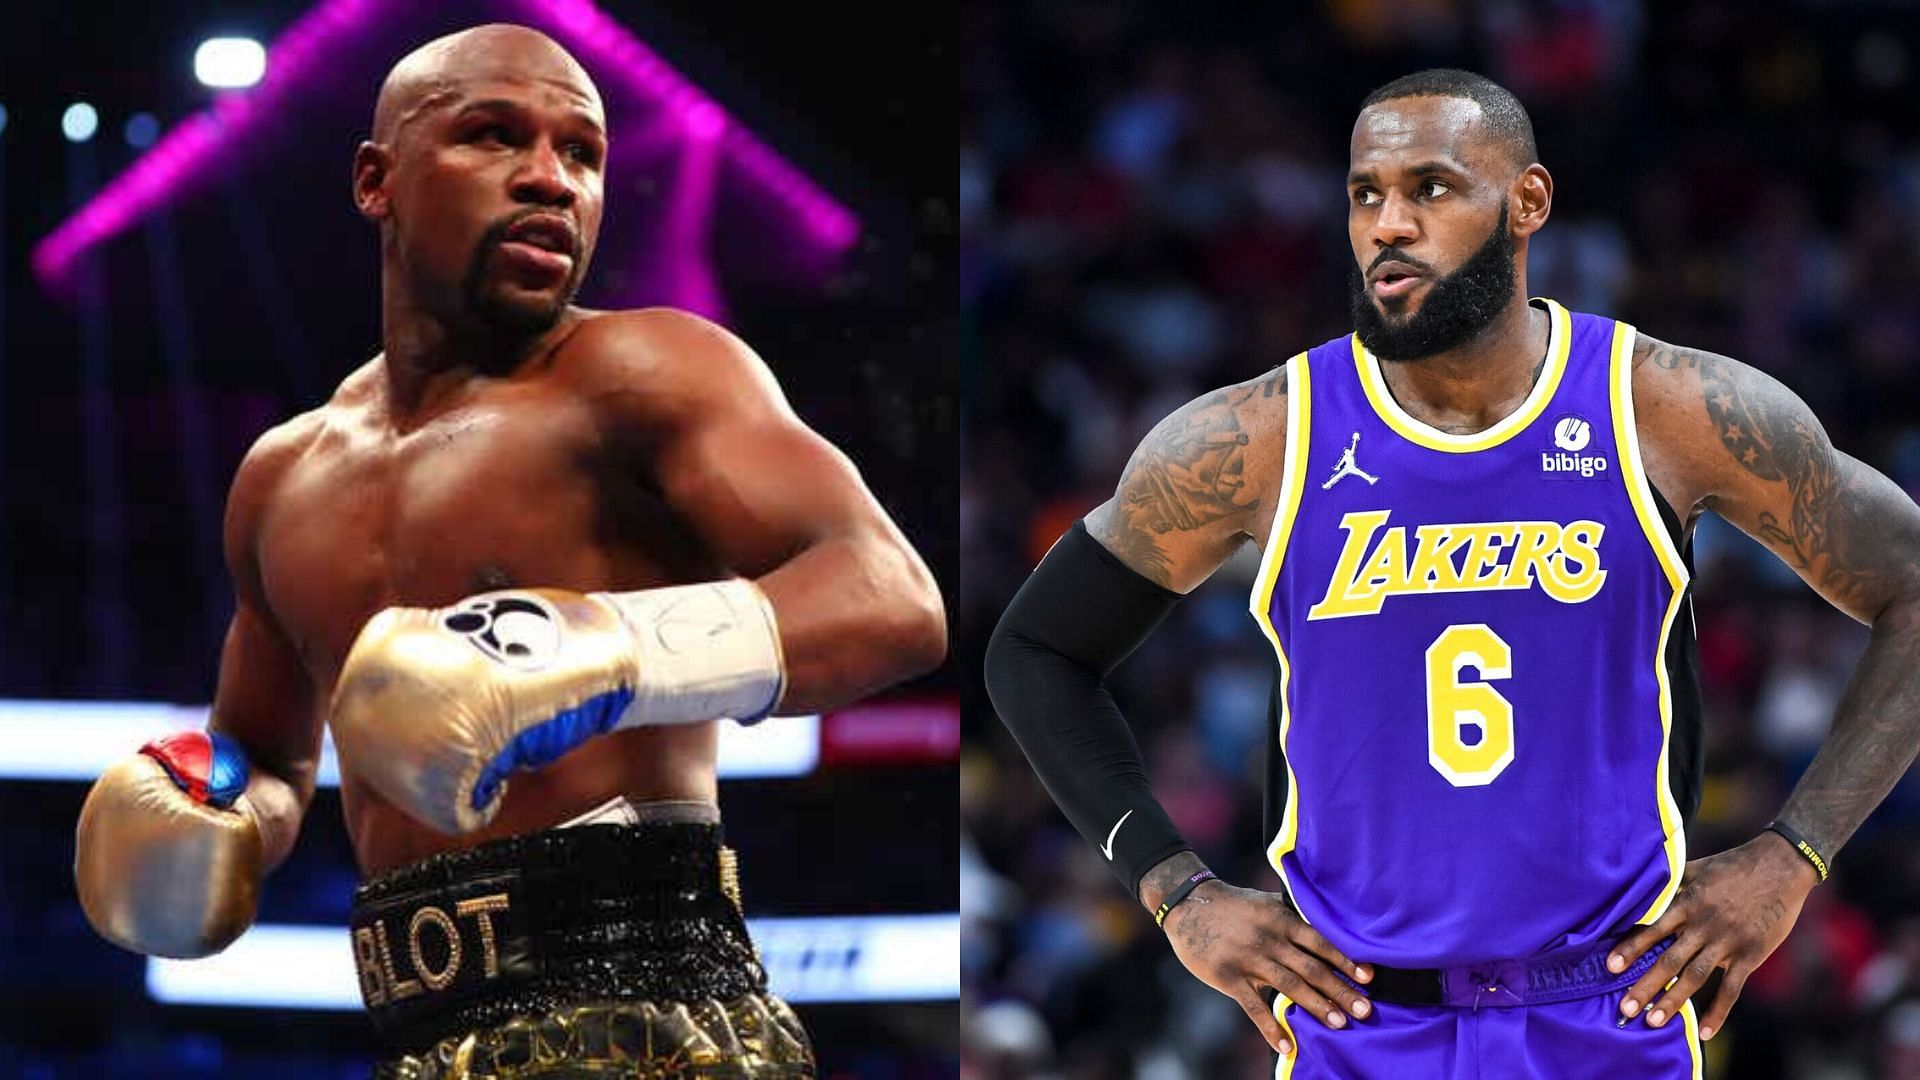 Floyd Mayweather (left) and Lebron James (Right)